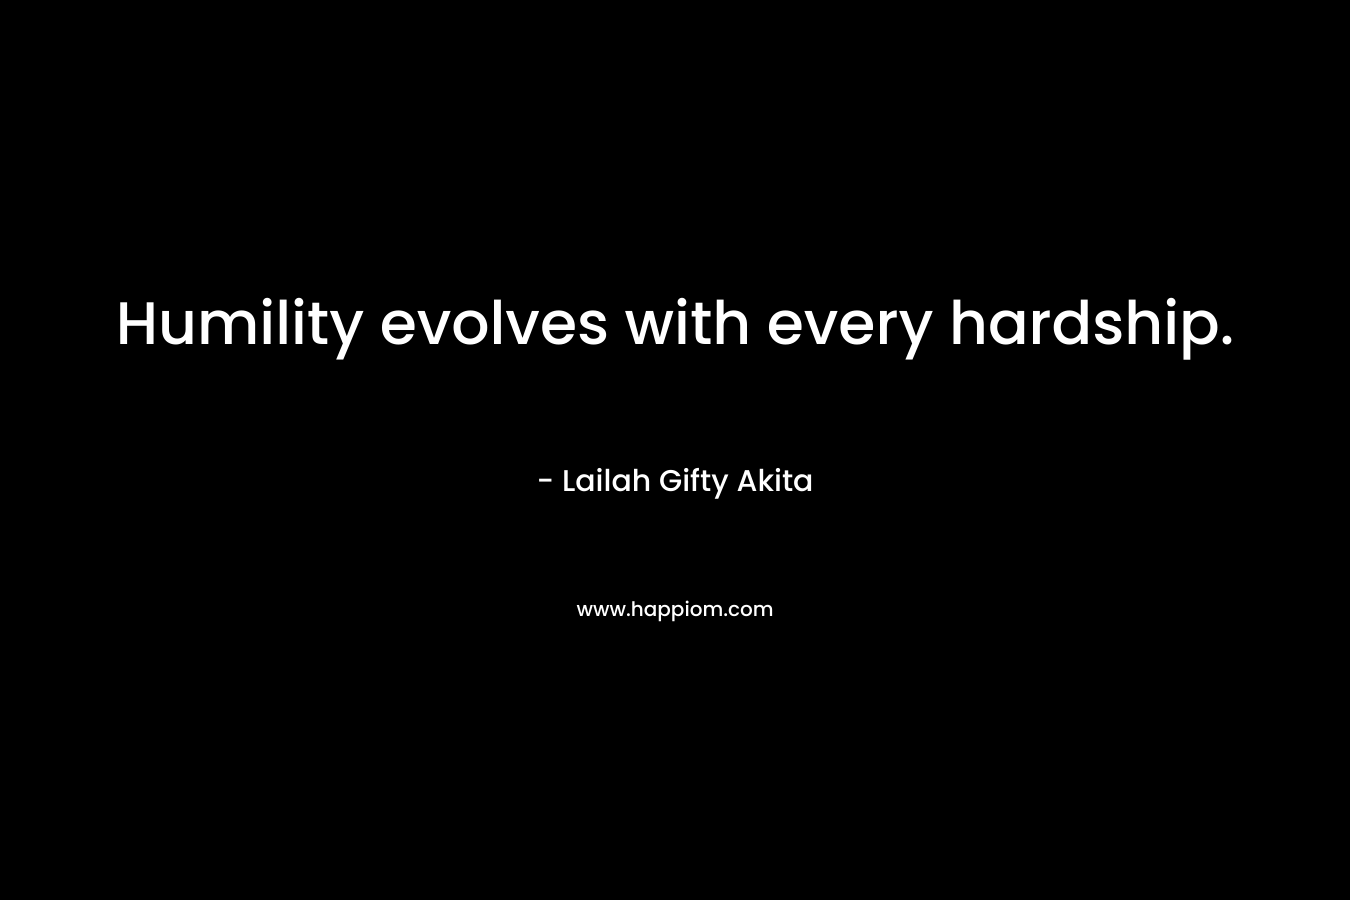 Humility evolves with every hardship. – Lailah Gifty Akita